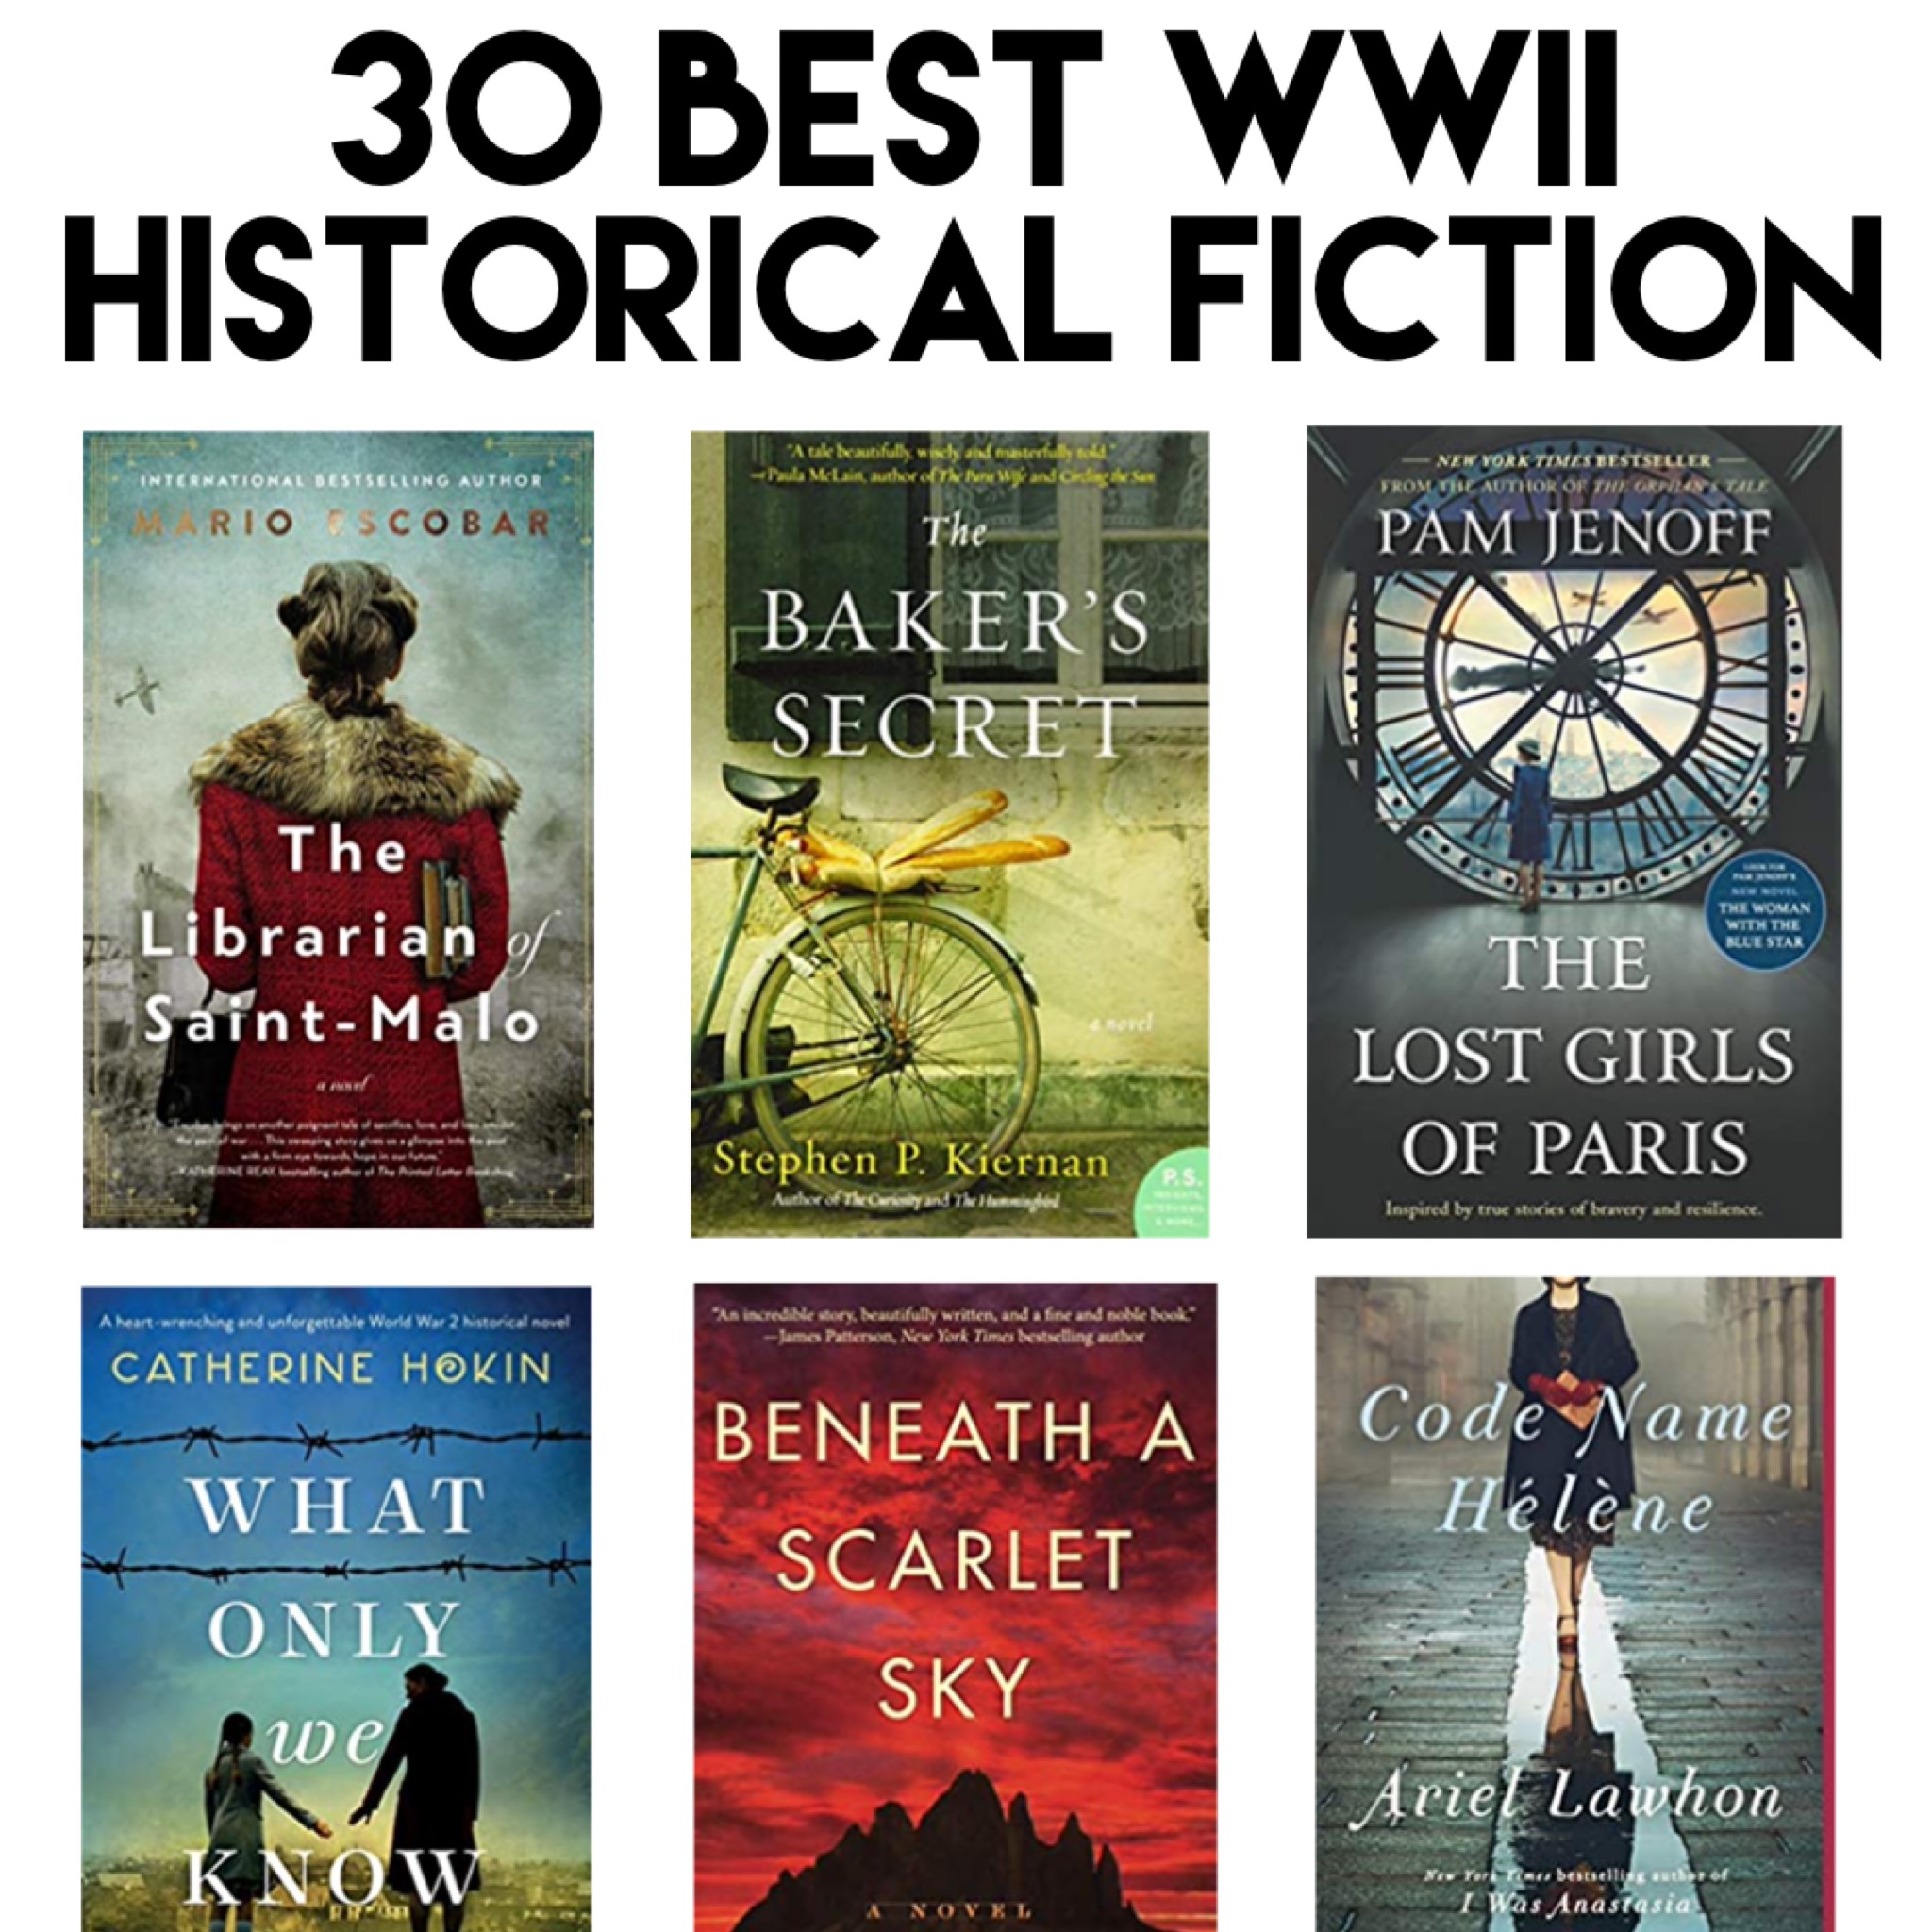 Historical fiction about World War 2 is a very popular book genre, and for good reason. Many of the books are typically based in fact, depicting true events or real people, but in an easier to read format than fiction. It puts the often complex events of WWII or people of that era into stories. Historical fiction allows the author to weave in elements of storytelling that make a book one you can't put down. These are the 30 best WWII historical fiction books #booklists #bestbooks #wwiibooks #historicalfiction